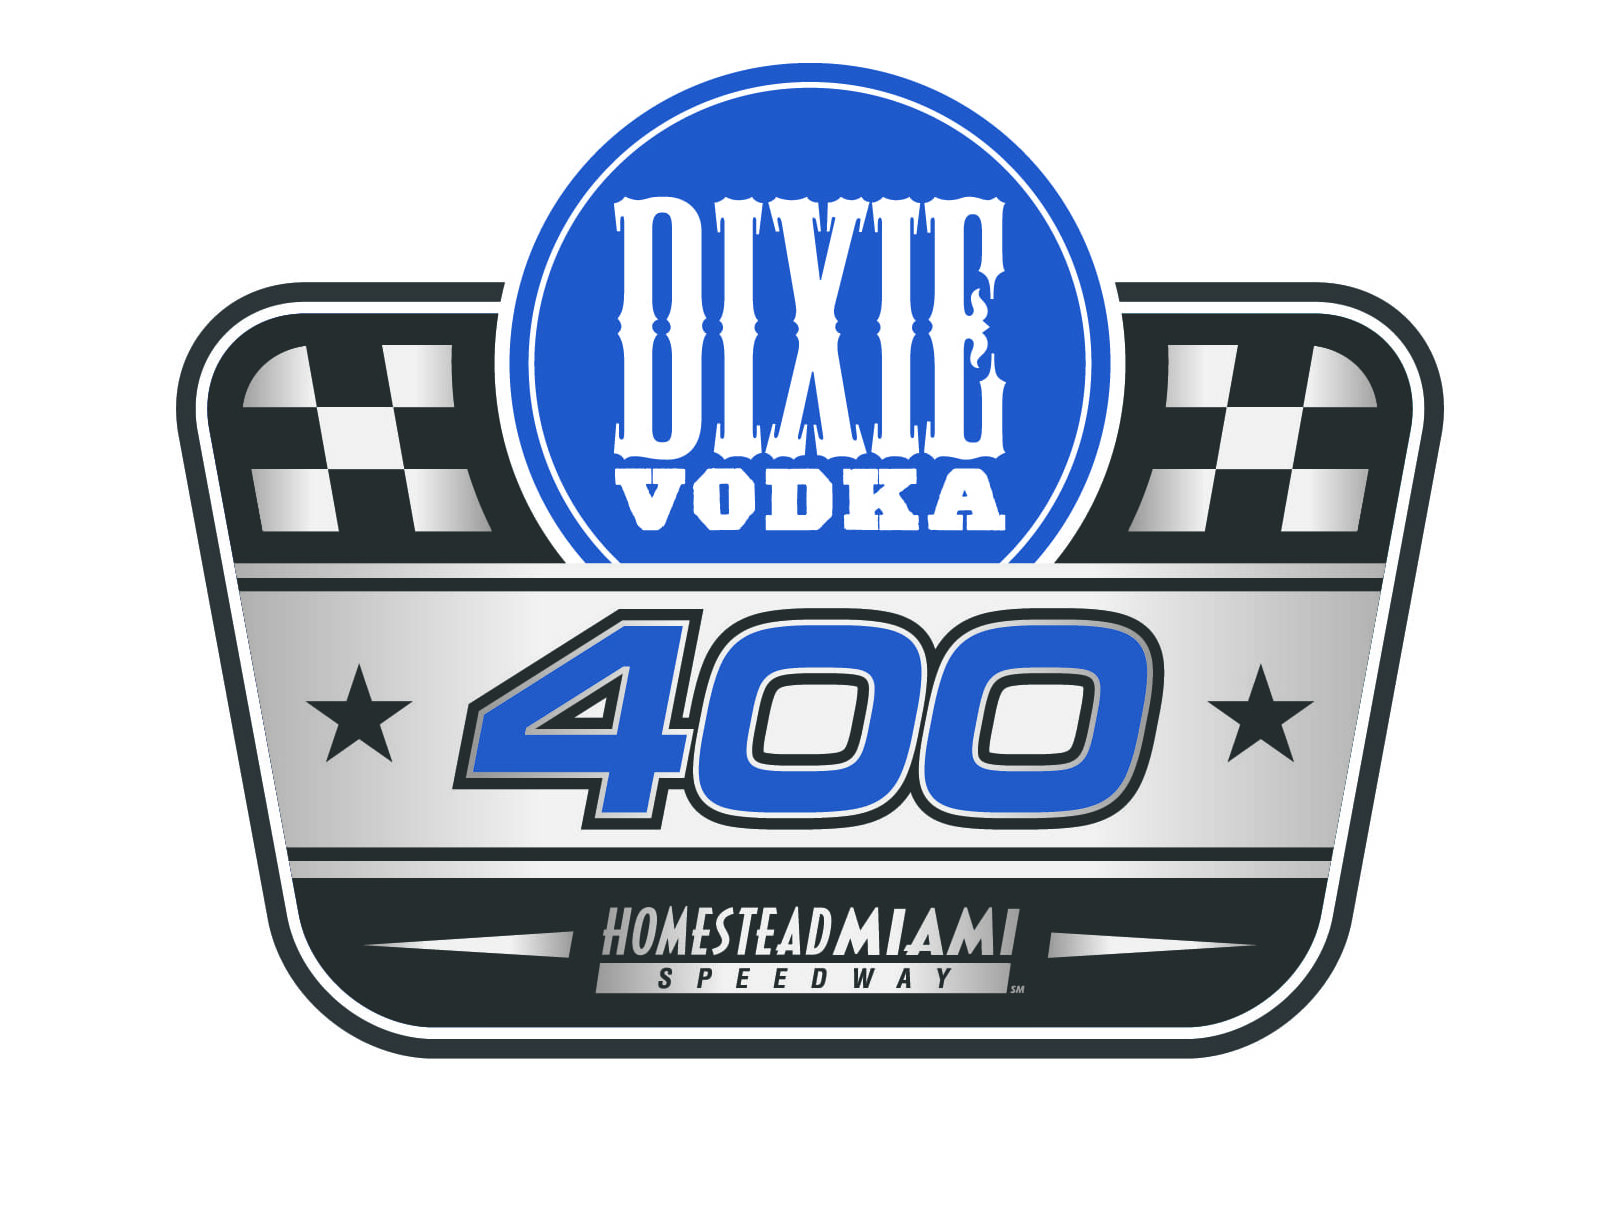 Buescher Wins Opening Stage, Earns Playoff Point in Strong Effort at Homestead